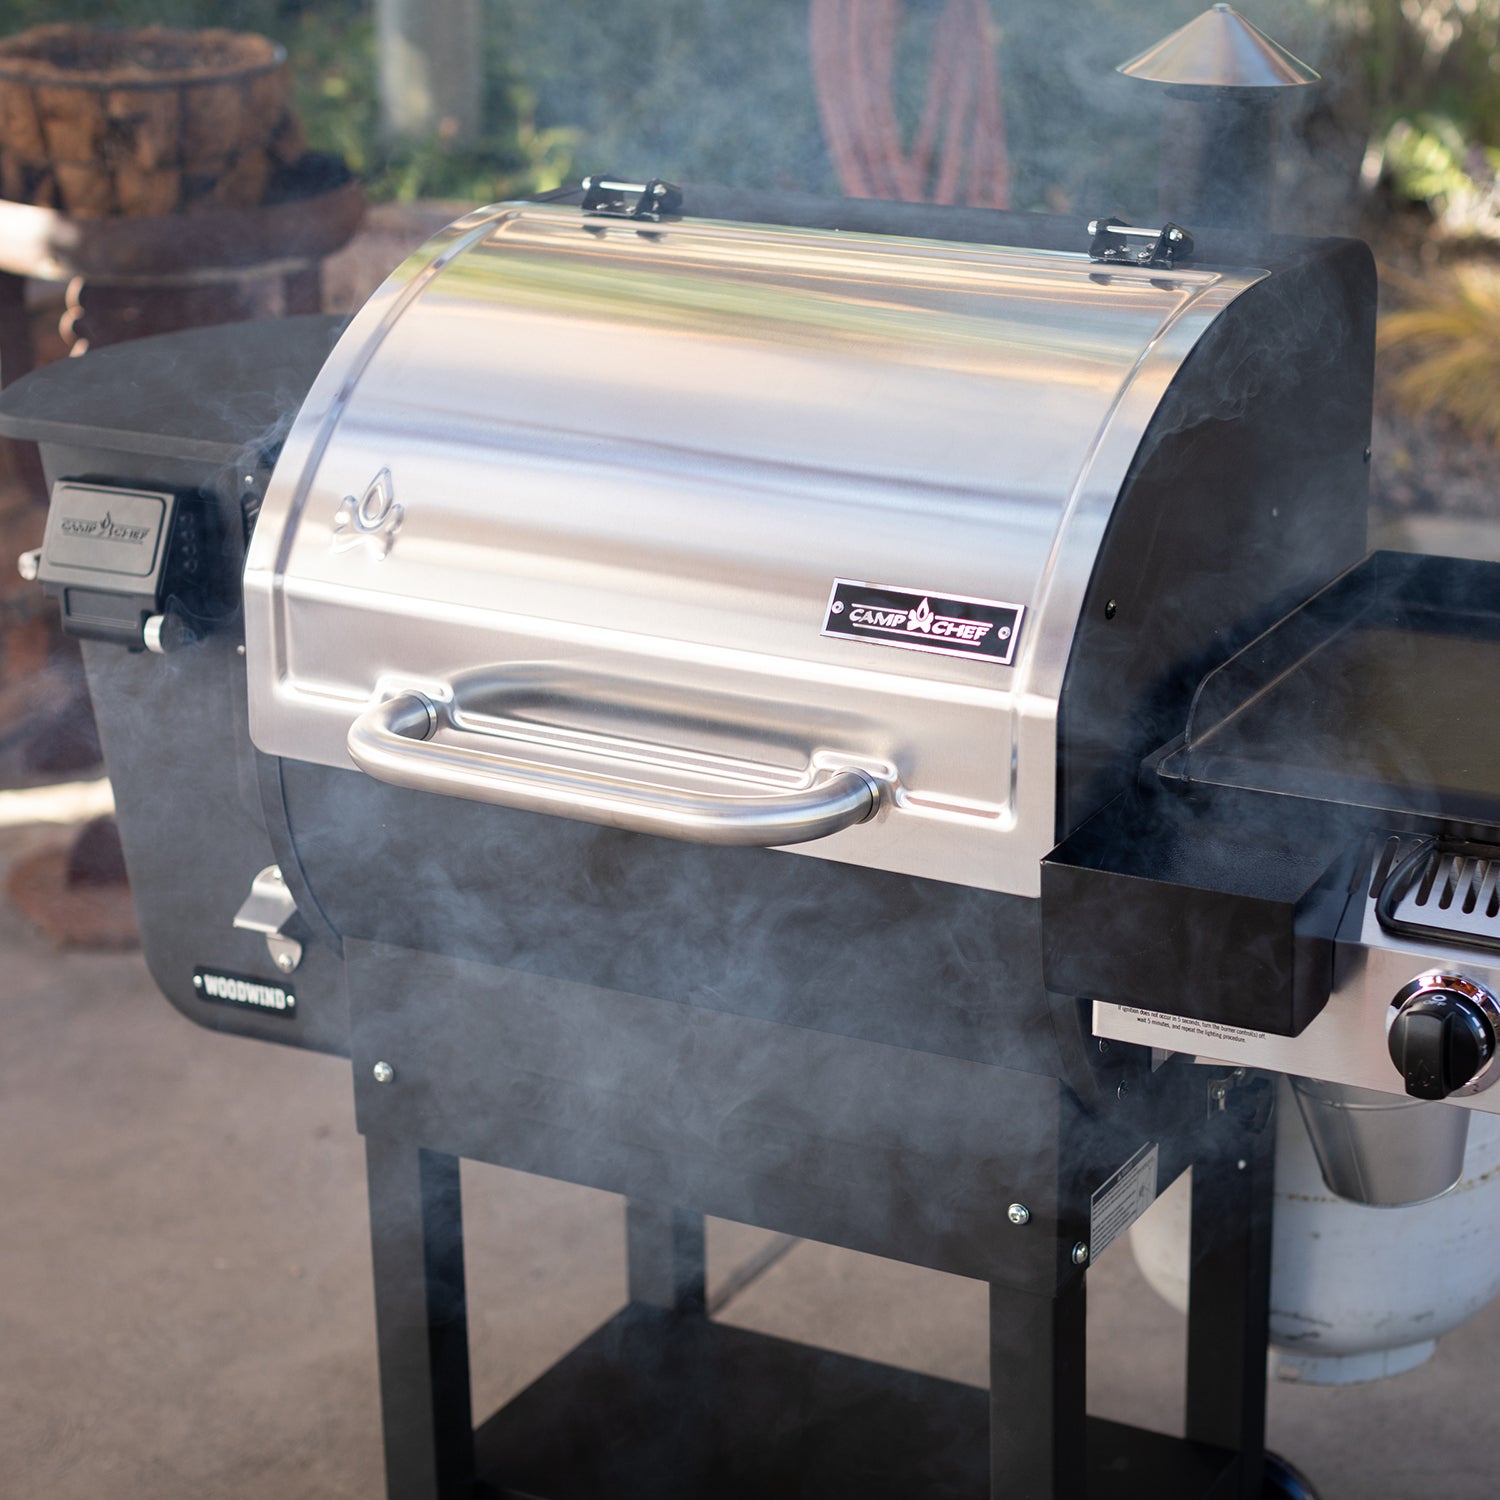 Is Cooking on a Smoker or Wood Pellet Grill Healthy?, Food Network Healthy  Eats: Recipes, Ideas, and Food News